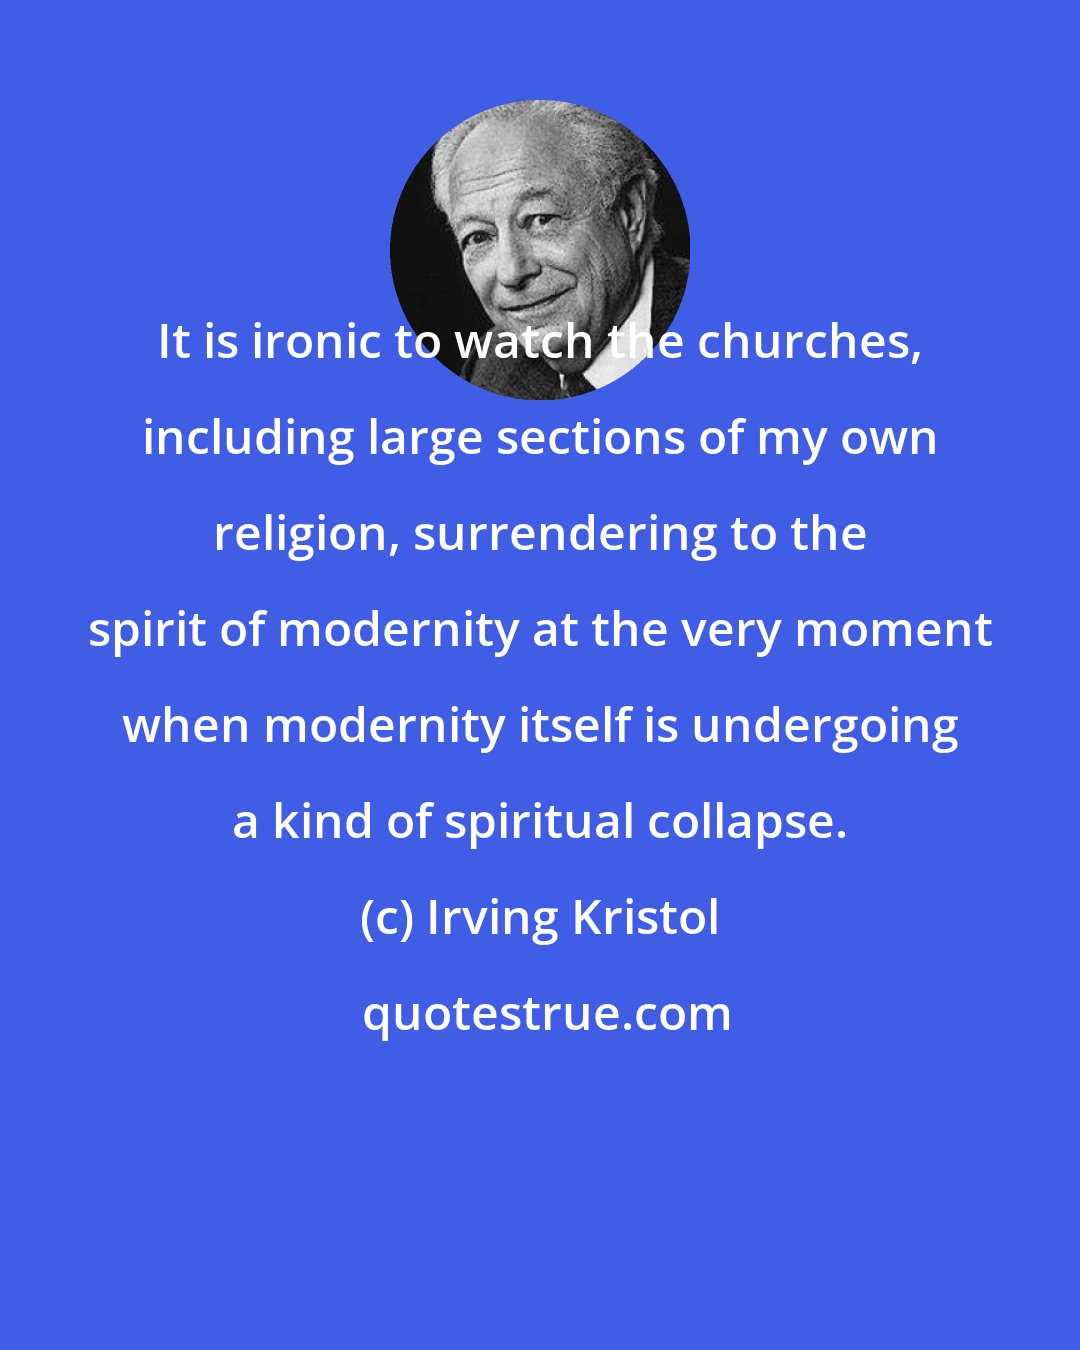 Irving Kristol: It is ironic to watch the churches, including large sections of my own religion, surrendering to the spirit of modernity at the very moment when modernity itself is undergoing a kind of spiritual collapse.